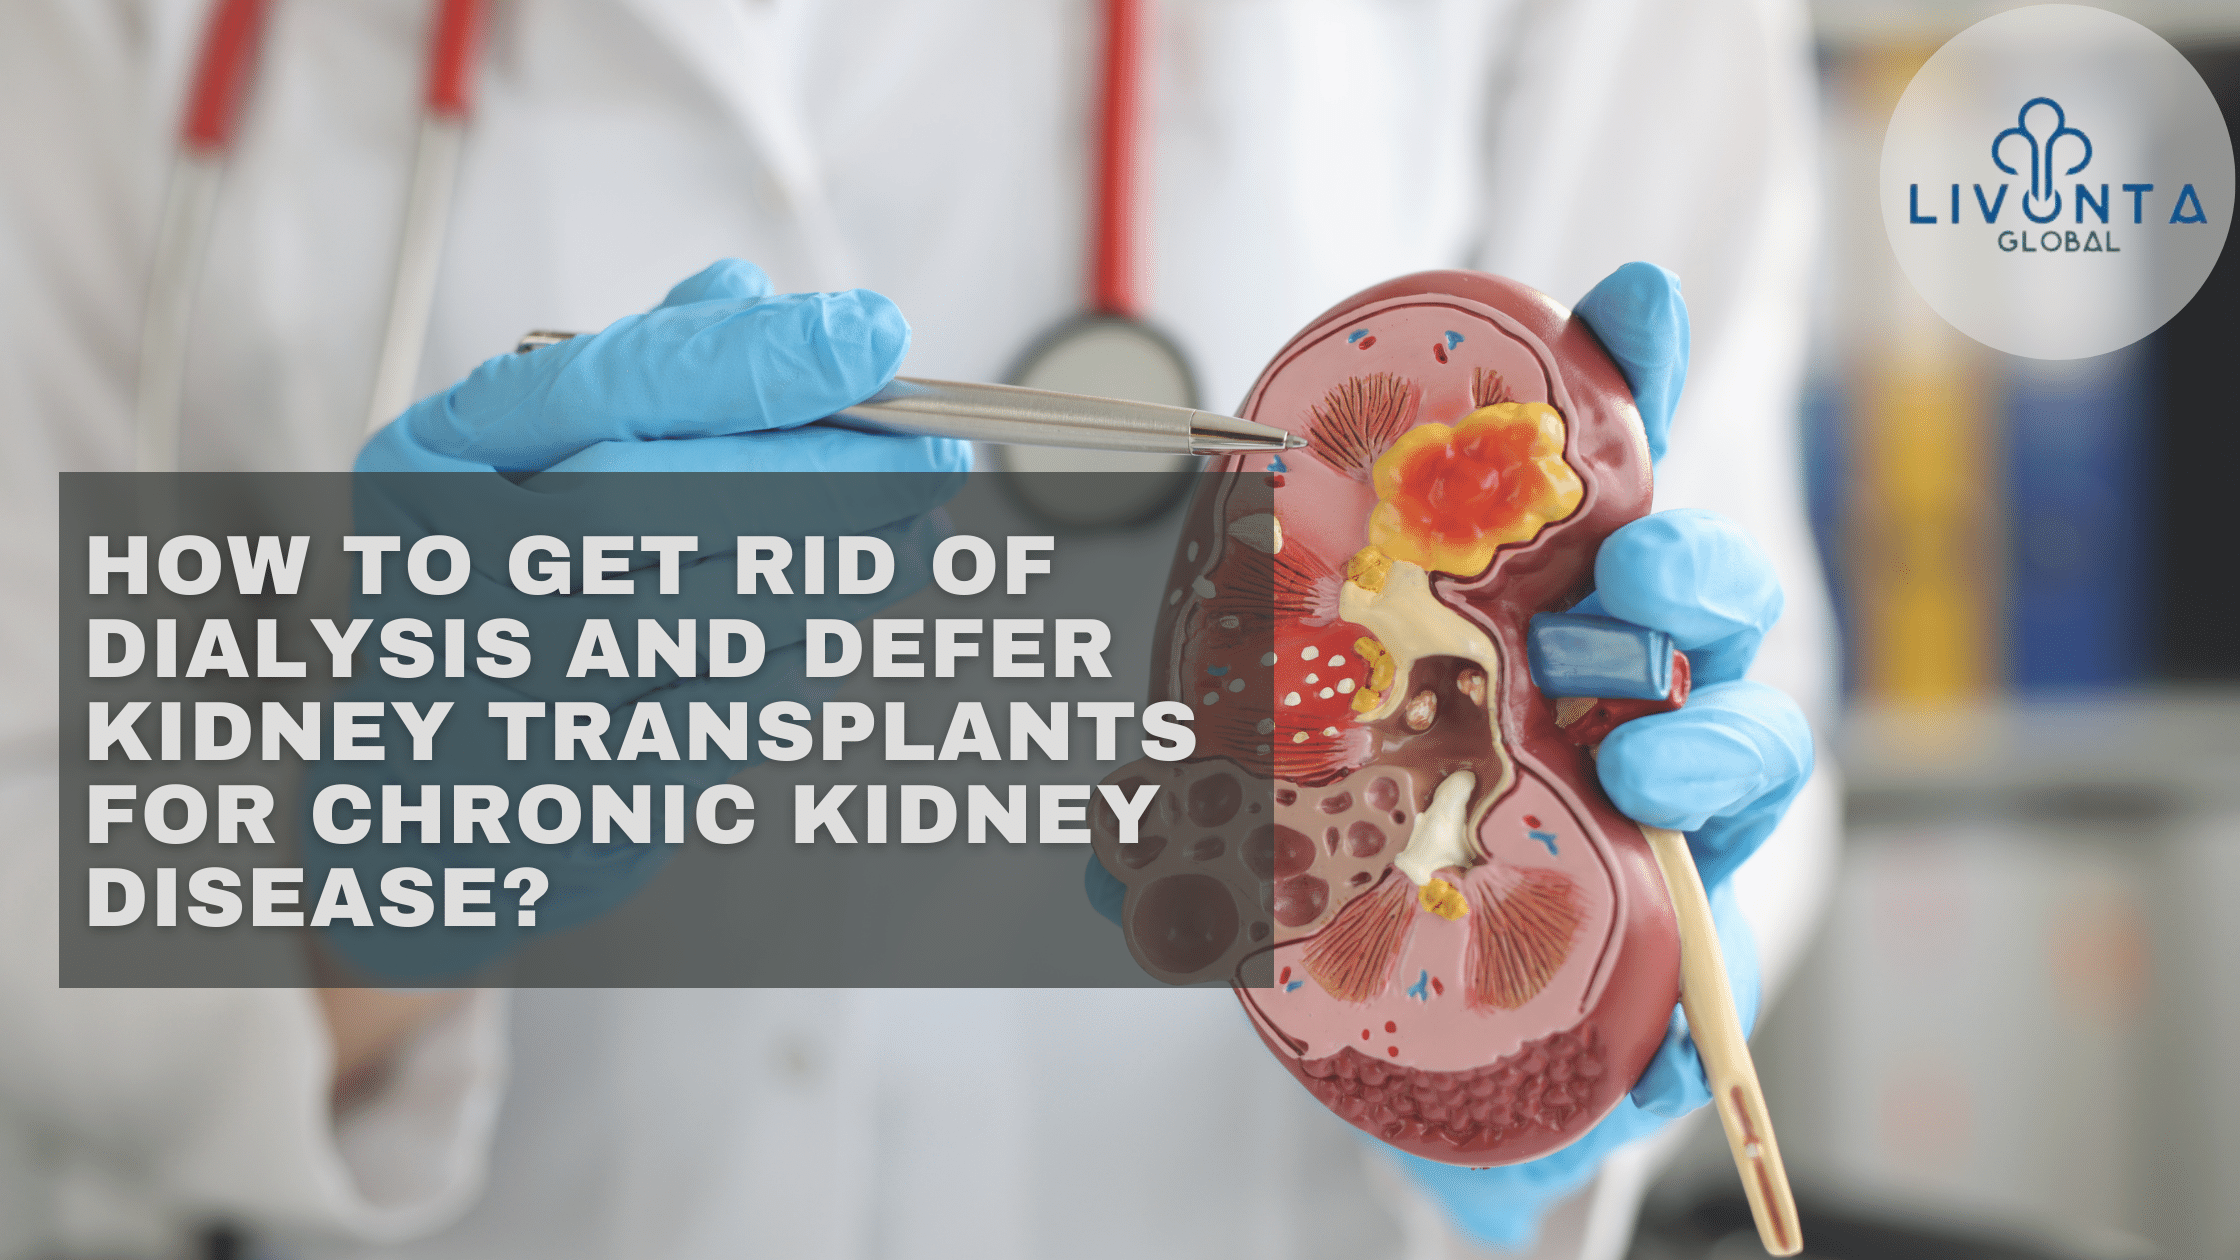 How To Get Rid Of Dialysis And Defer Kidney Transplants For Chronic Kidney Disease